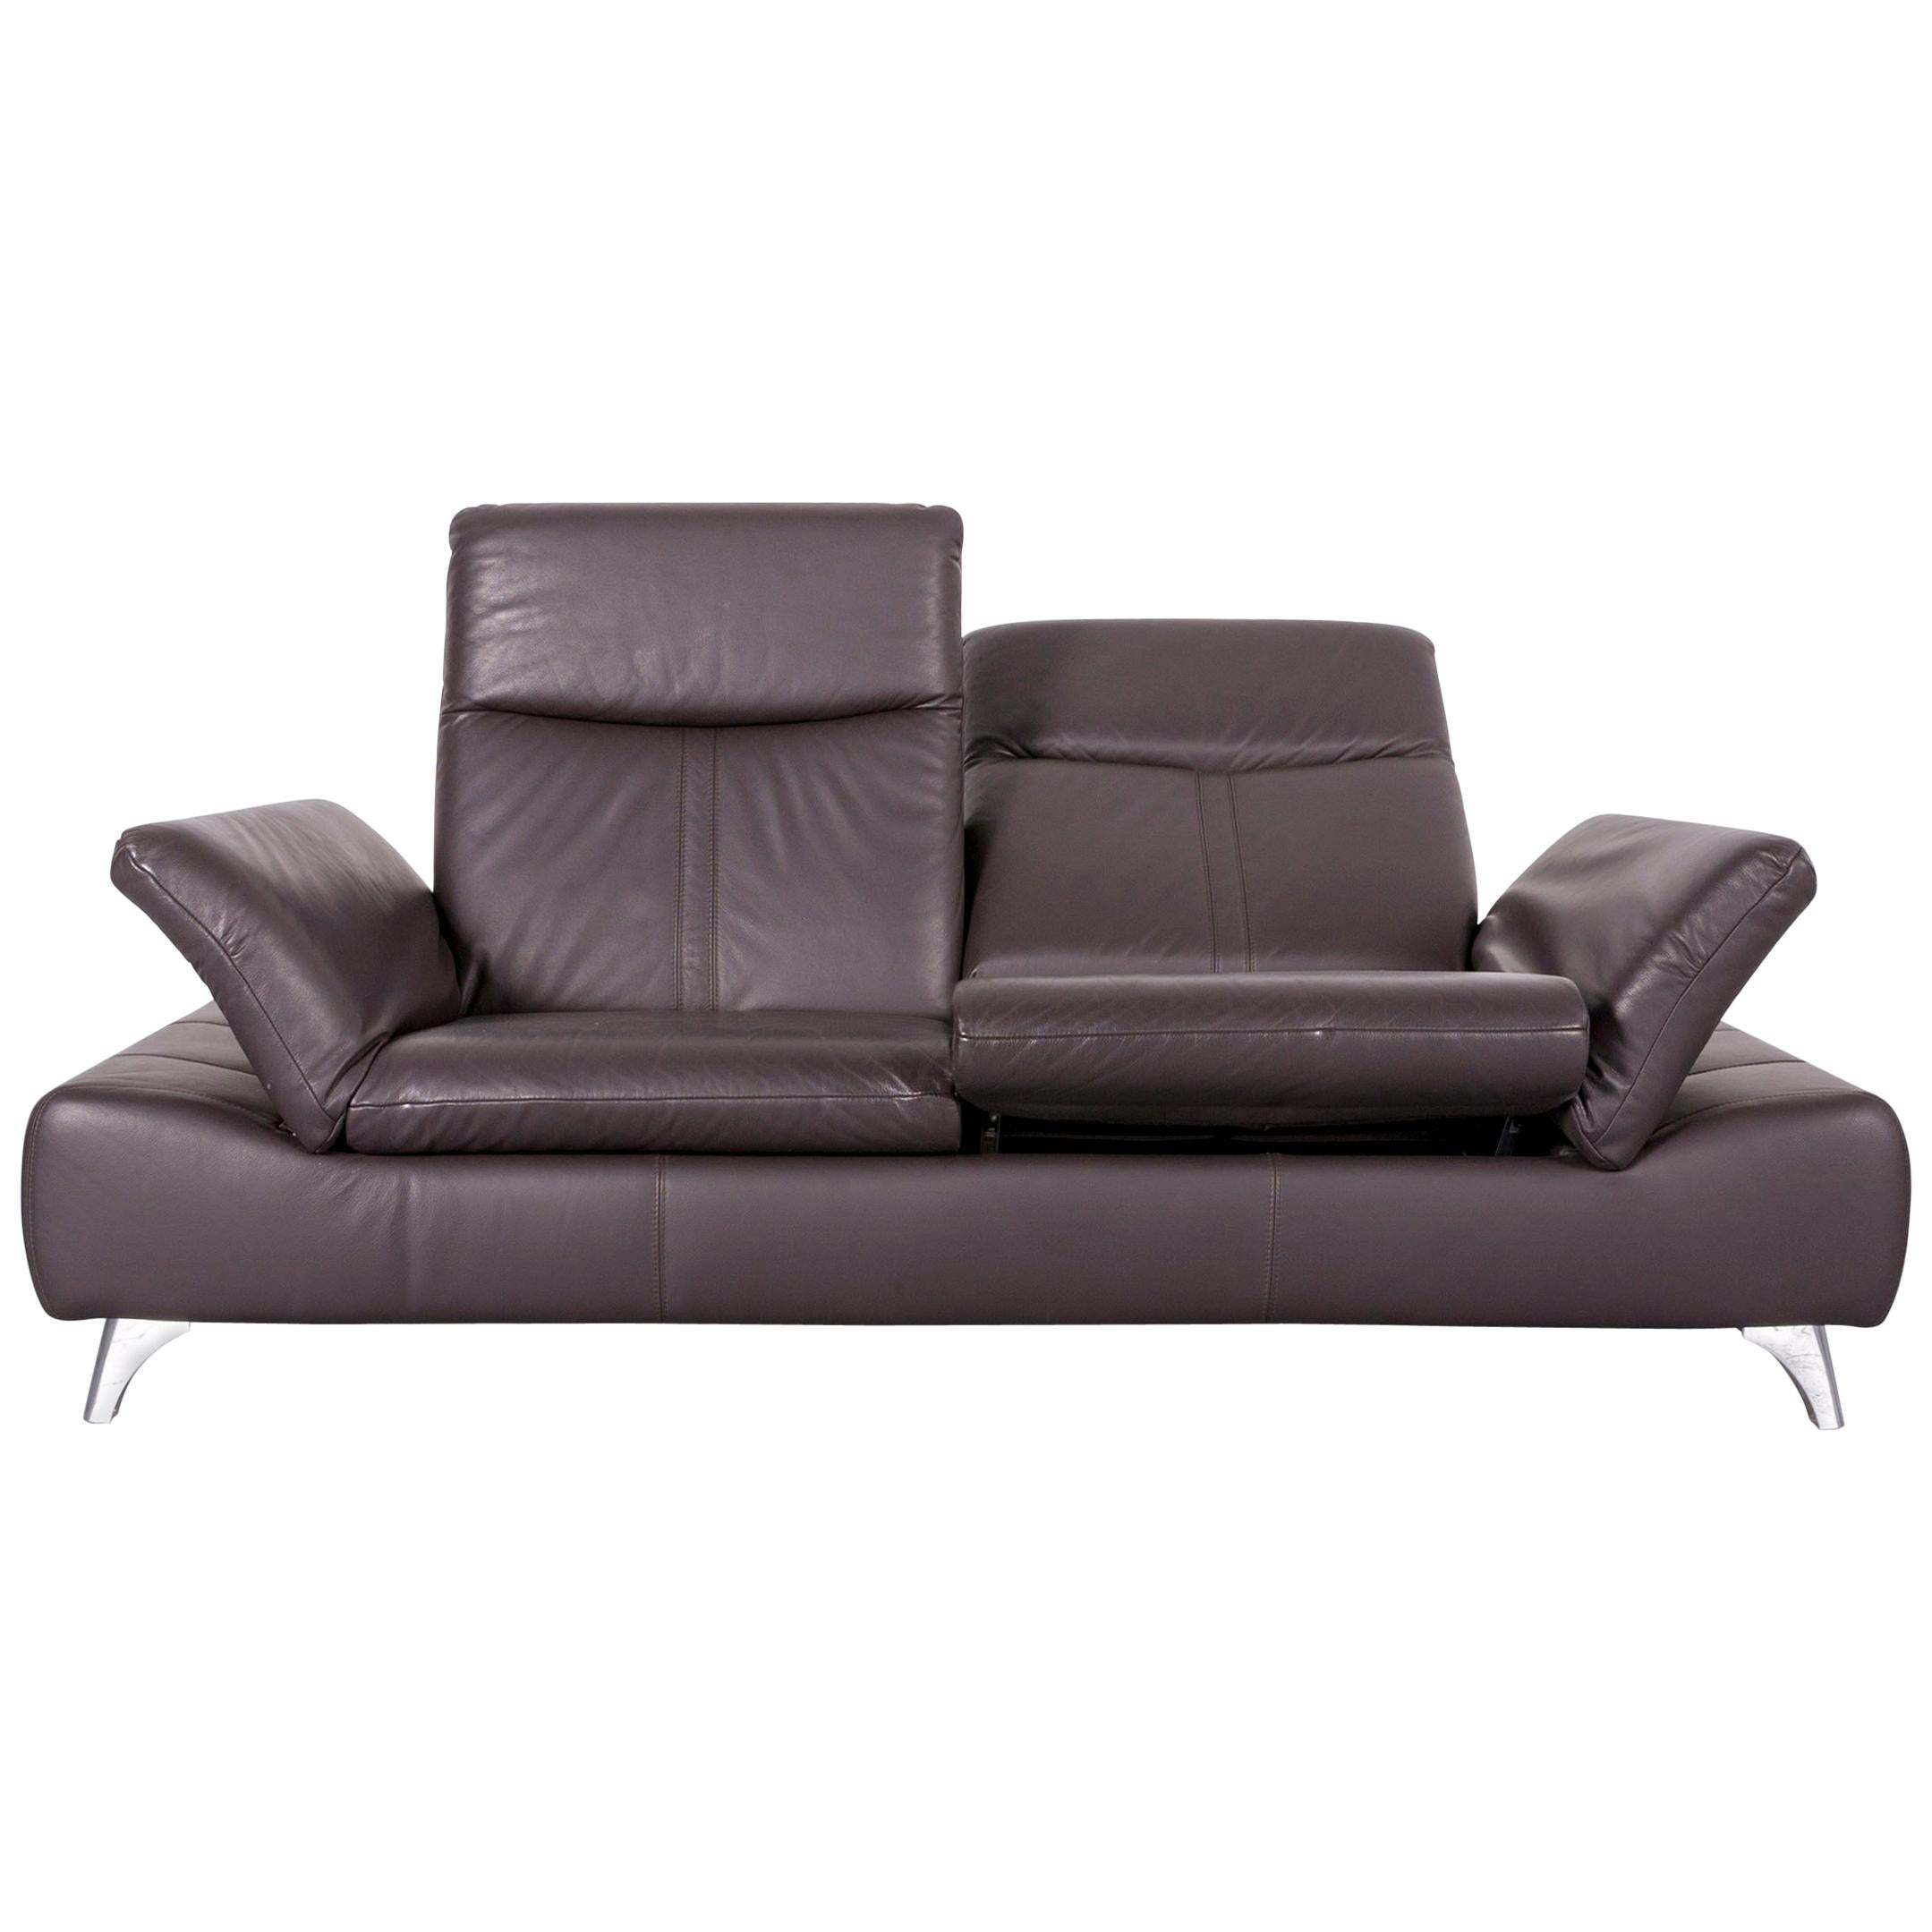 Musterring Leather Sofa Brown Three-Seat Couch For Sale